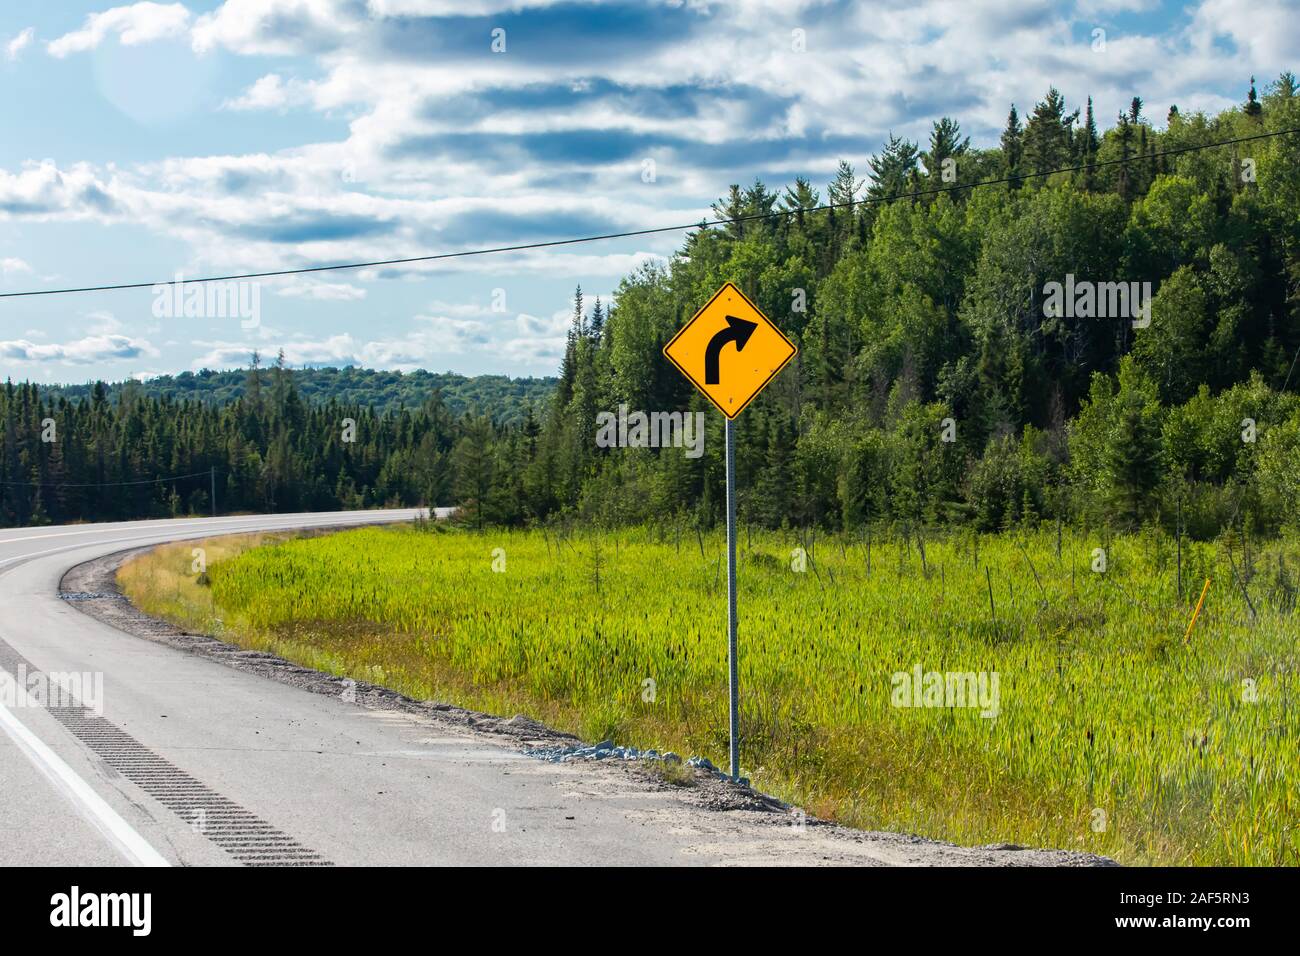 https://c8.alamy.com/comp/2AF5RN3/slight-bend-or-curve-in-the-road-ahead-warning-for-a-curve-to-the-right-warning-road-sign-on-the-roadside-with-pine-trees-forest-background-2AF5RN3.jpg